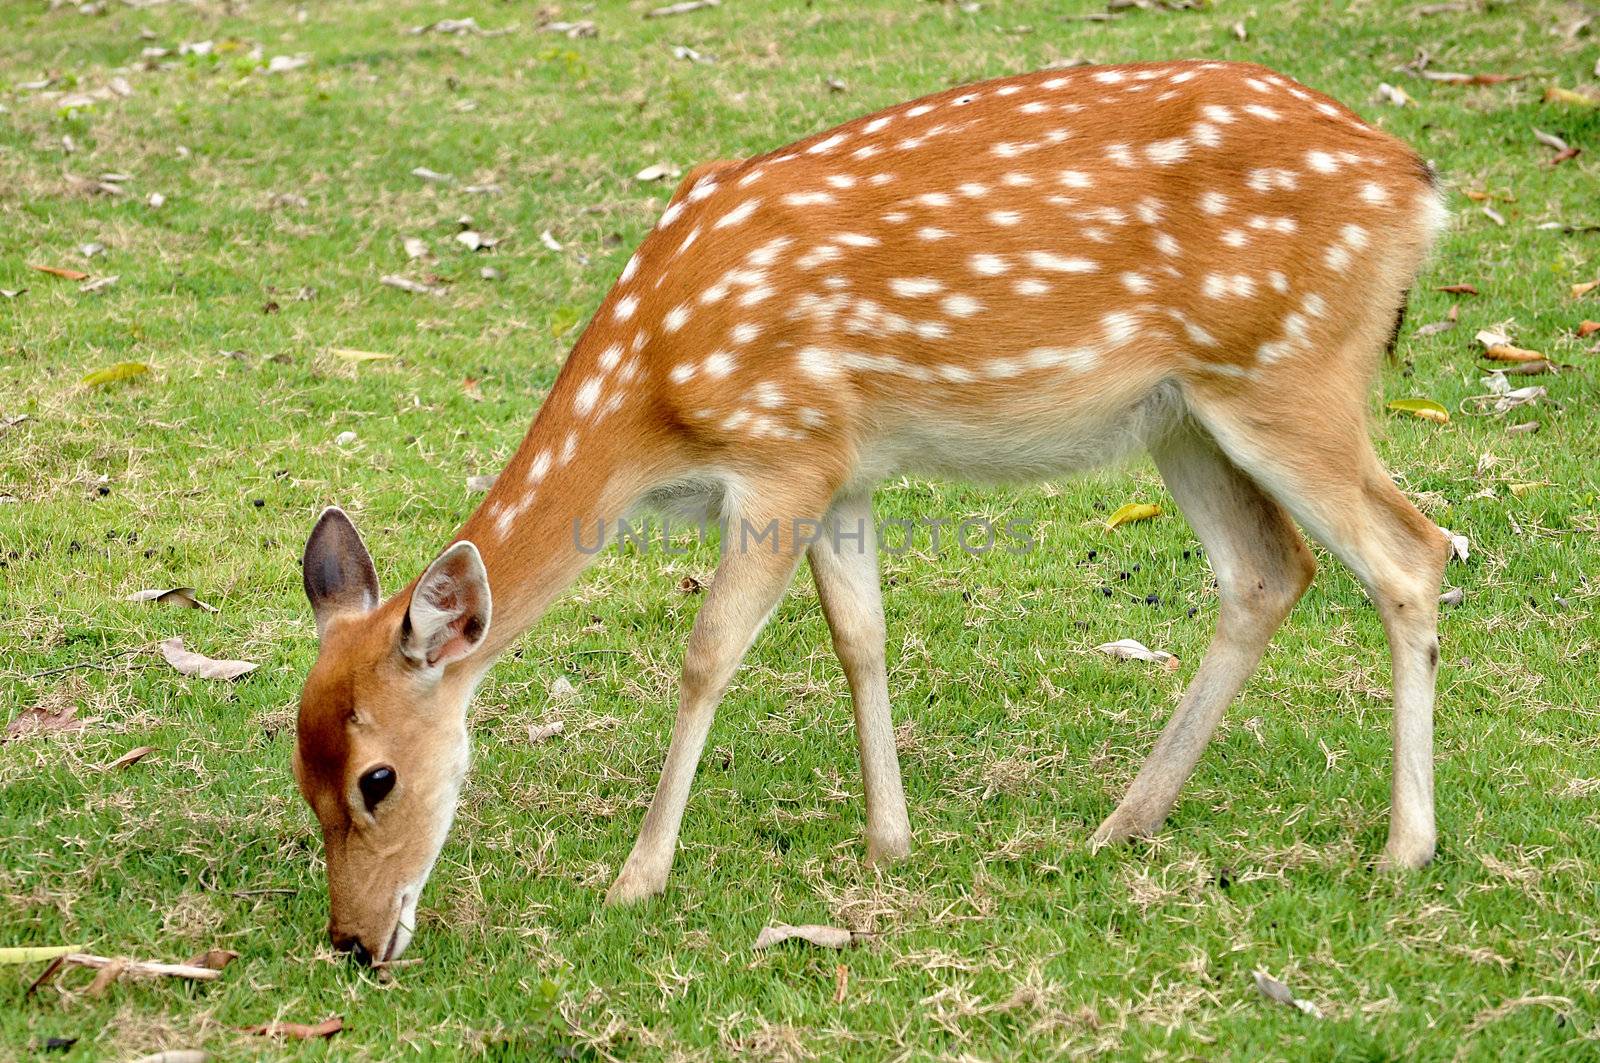 The Sika deer is one of the few deer species that does not lose its spots upon reaching maturity.
